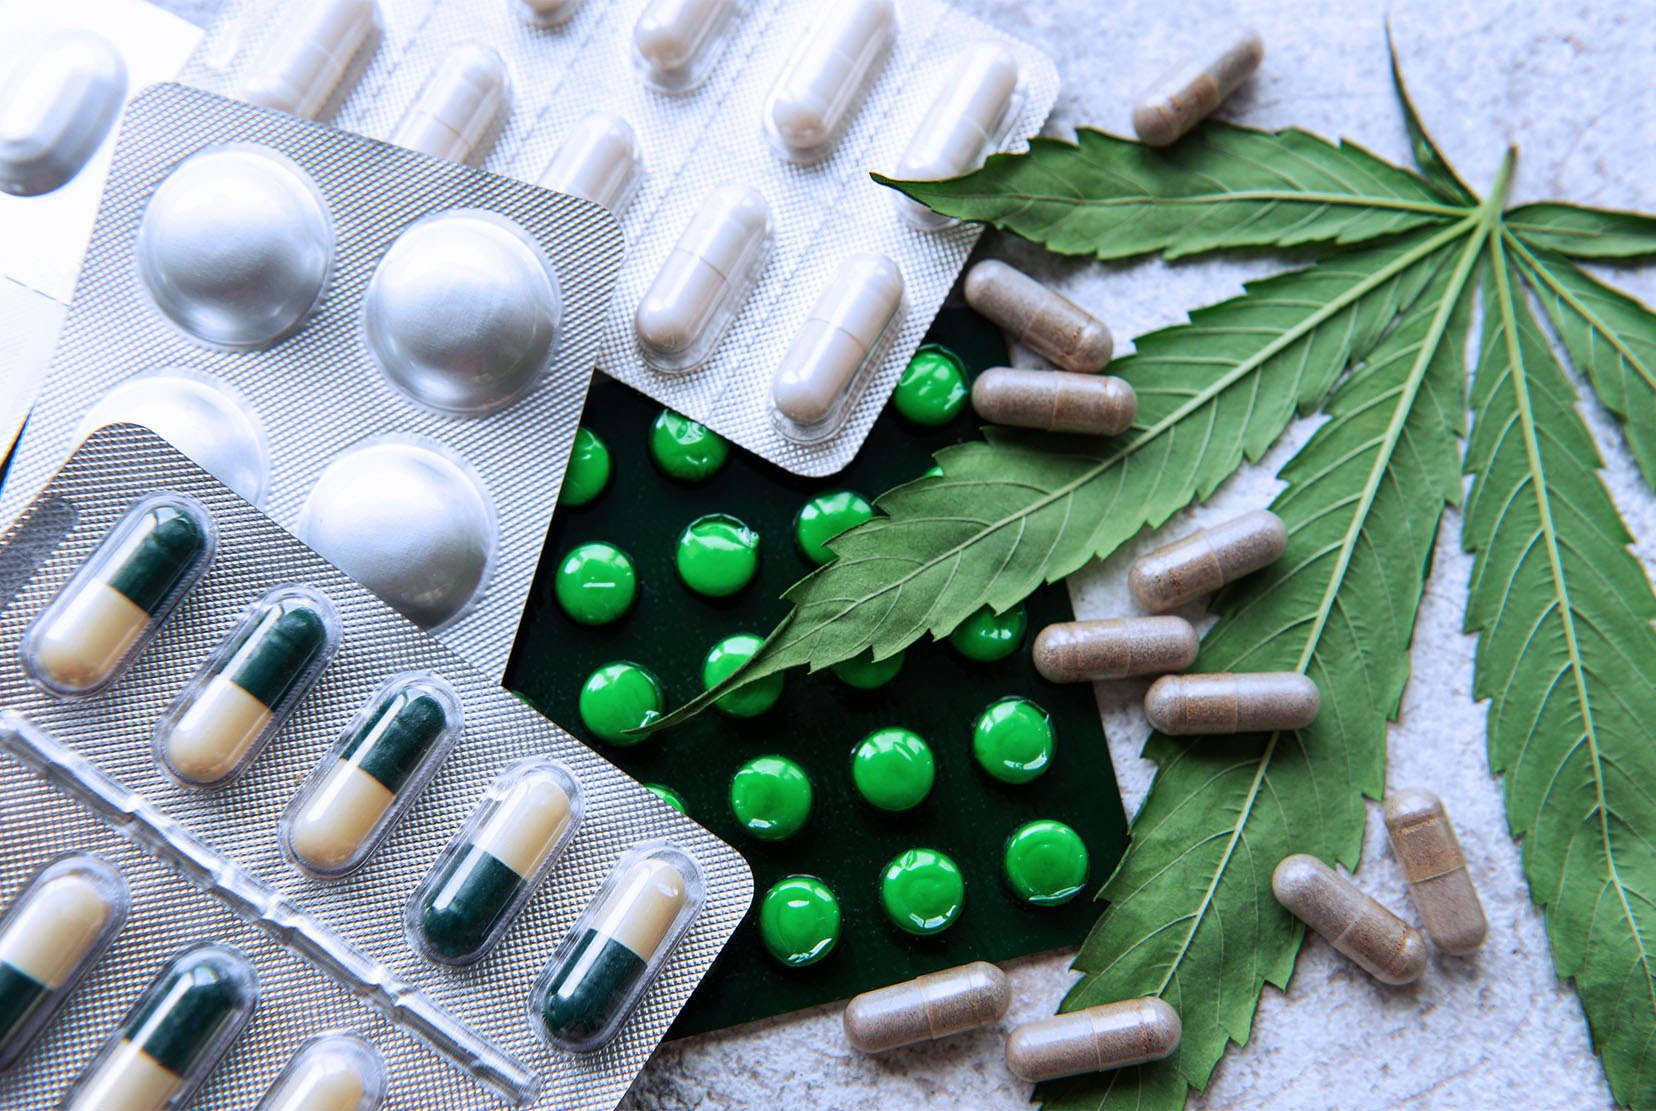 How Does Cannabis Interact with Antidepressants?